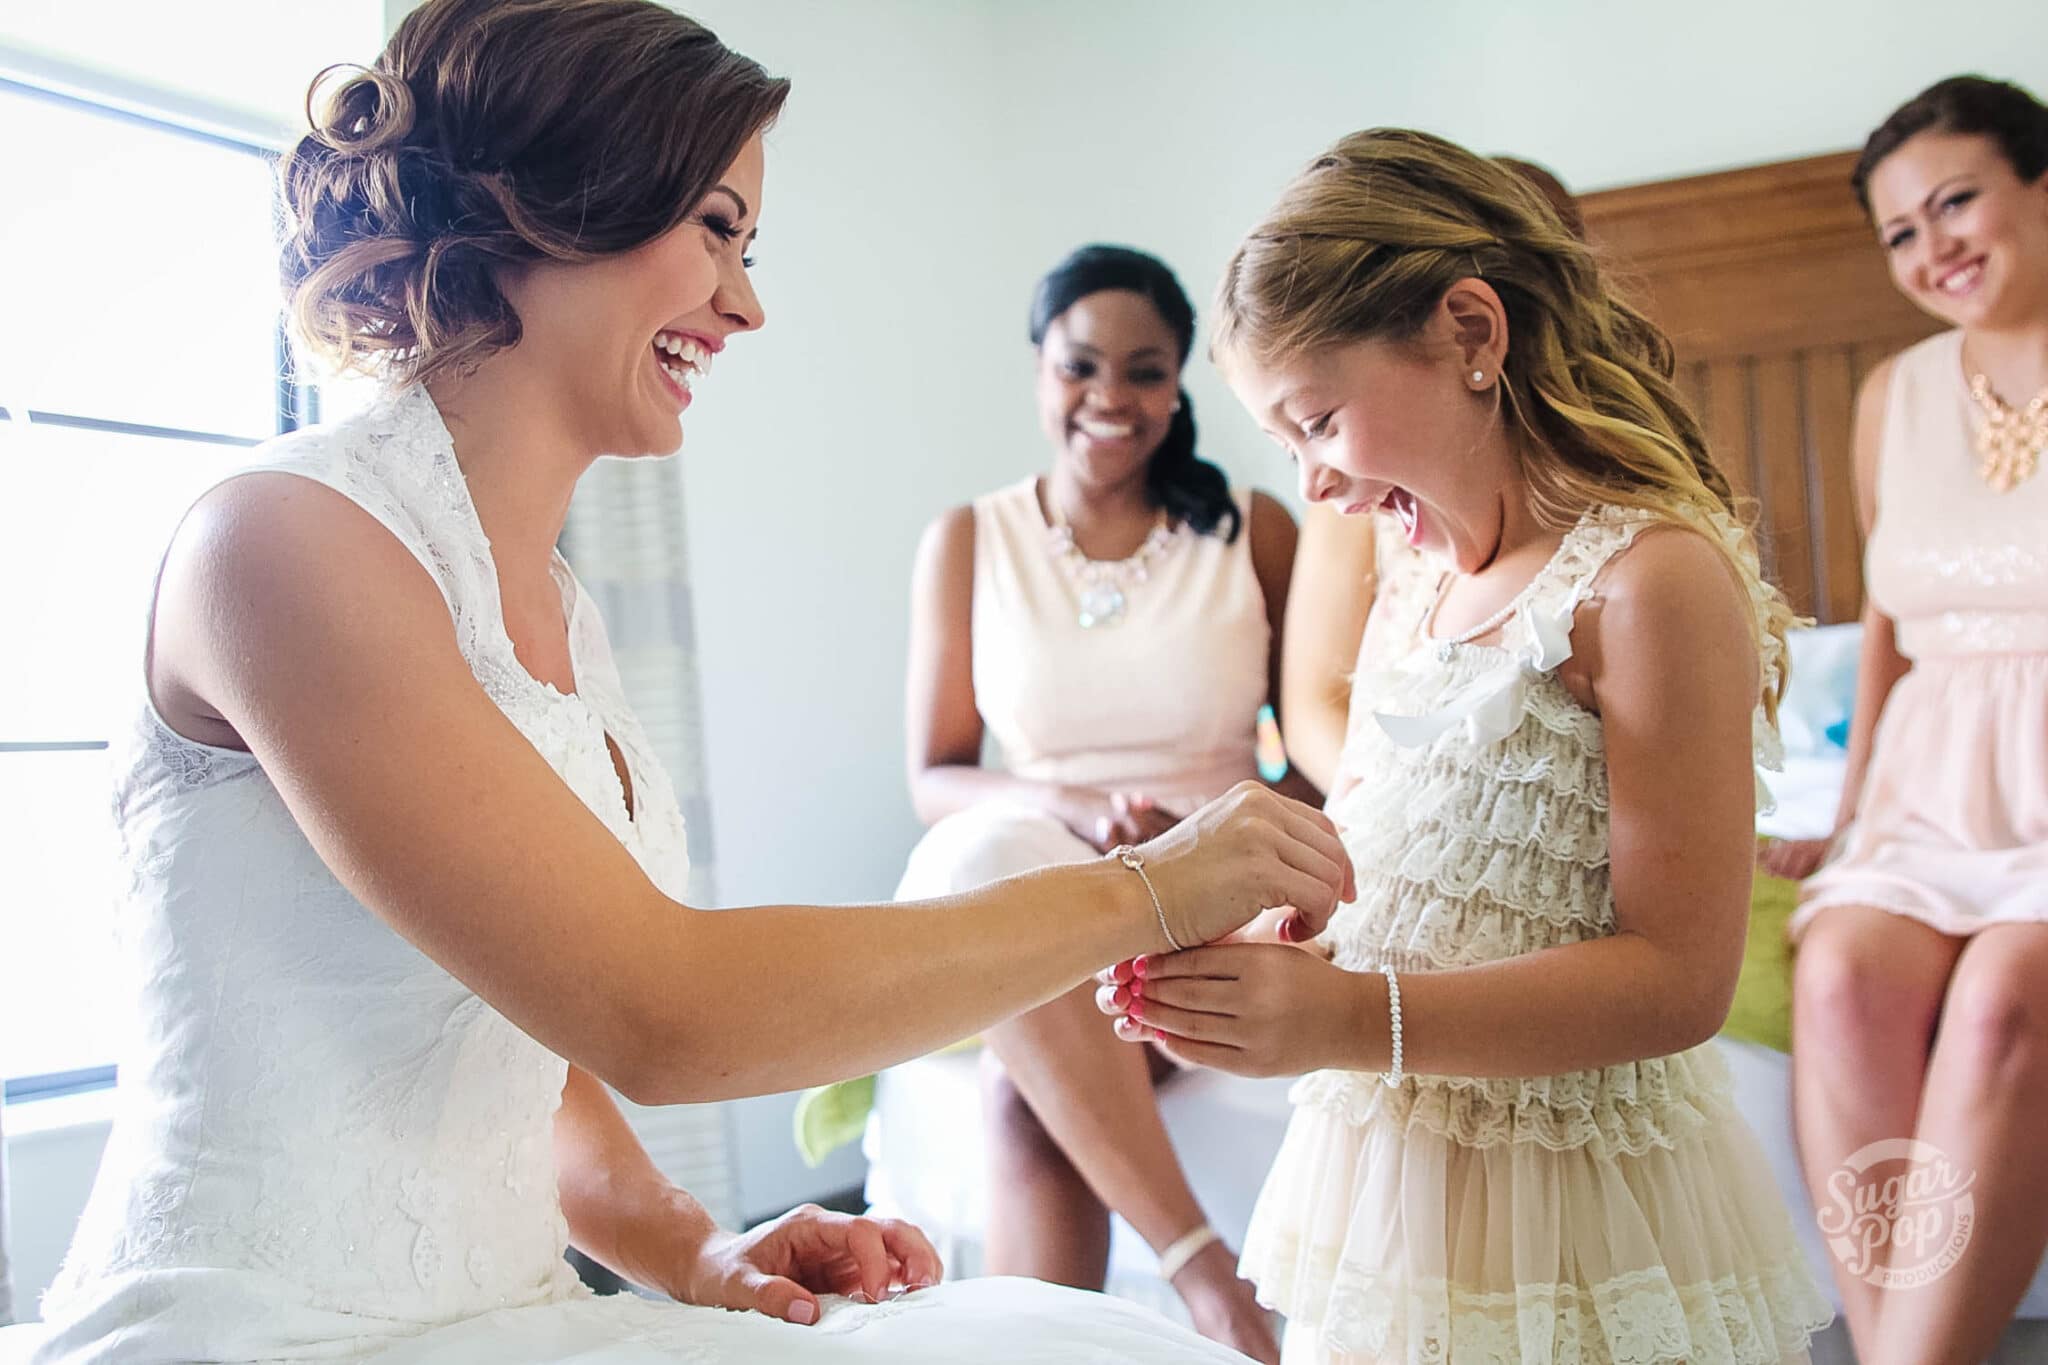 laughing bride lets little girl with ruffle dress on put a bracelet on her right wrist with two women in the background sitting on a bed